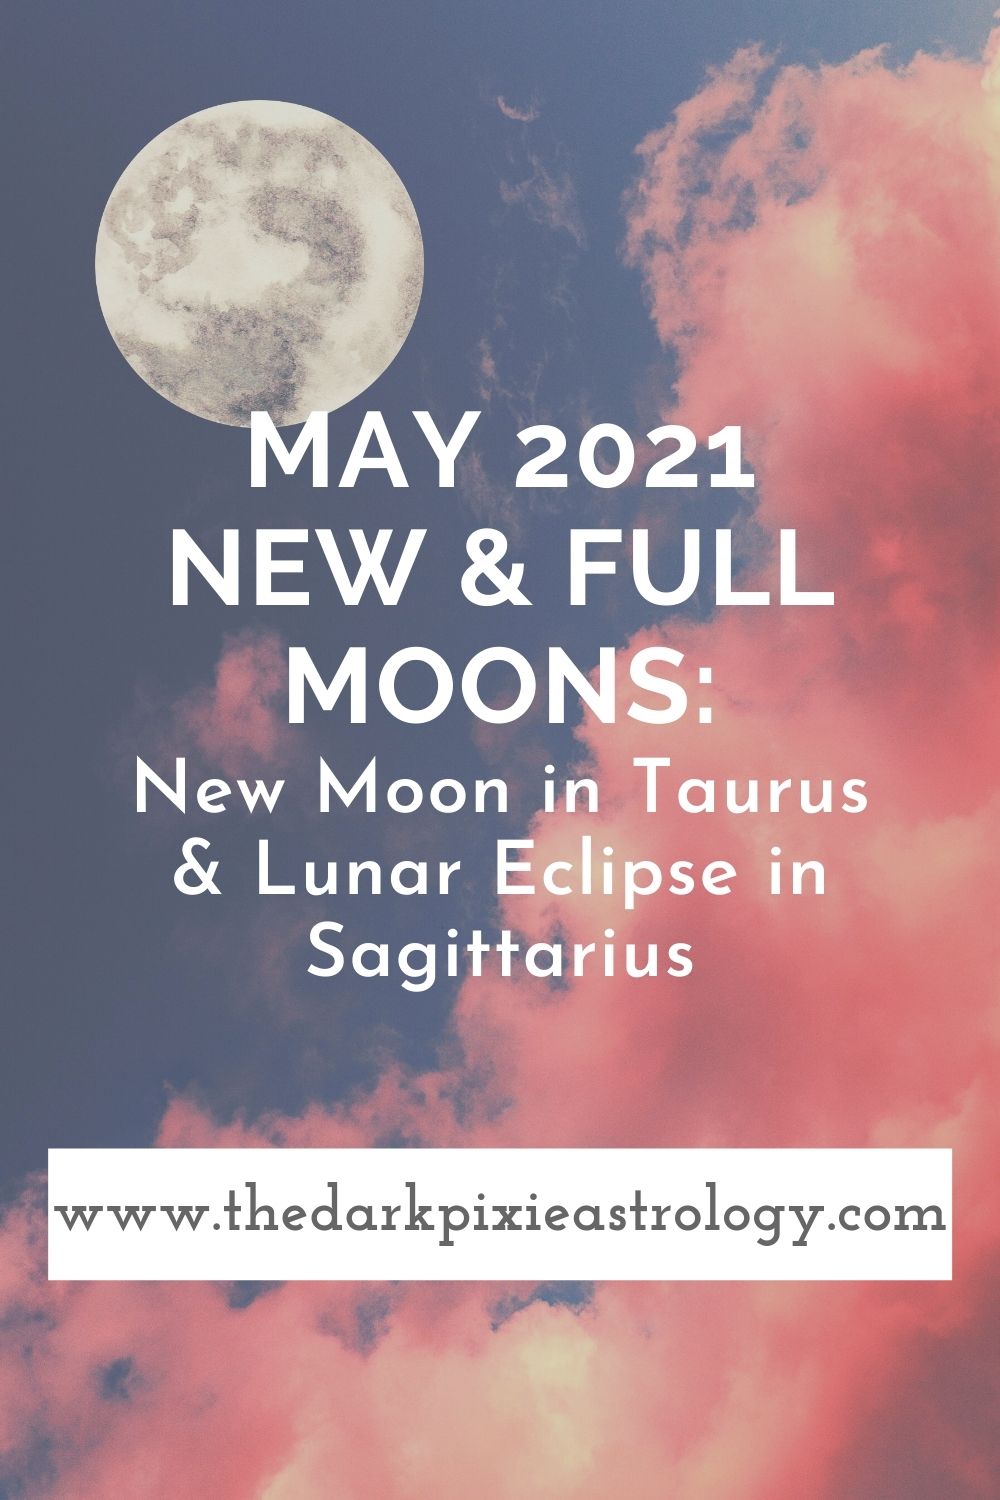 May 2021 New & Full Moons: New Moon in Taurus & Lunar Eclipse in Sagittarius - The Dark Pixie Astrology